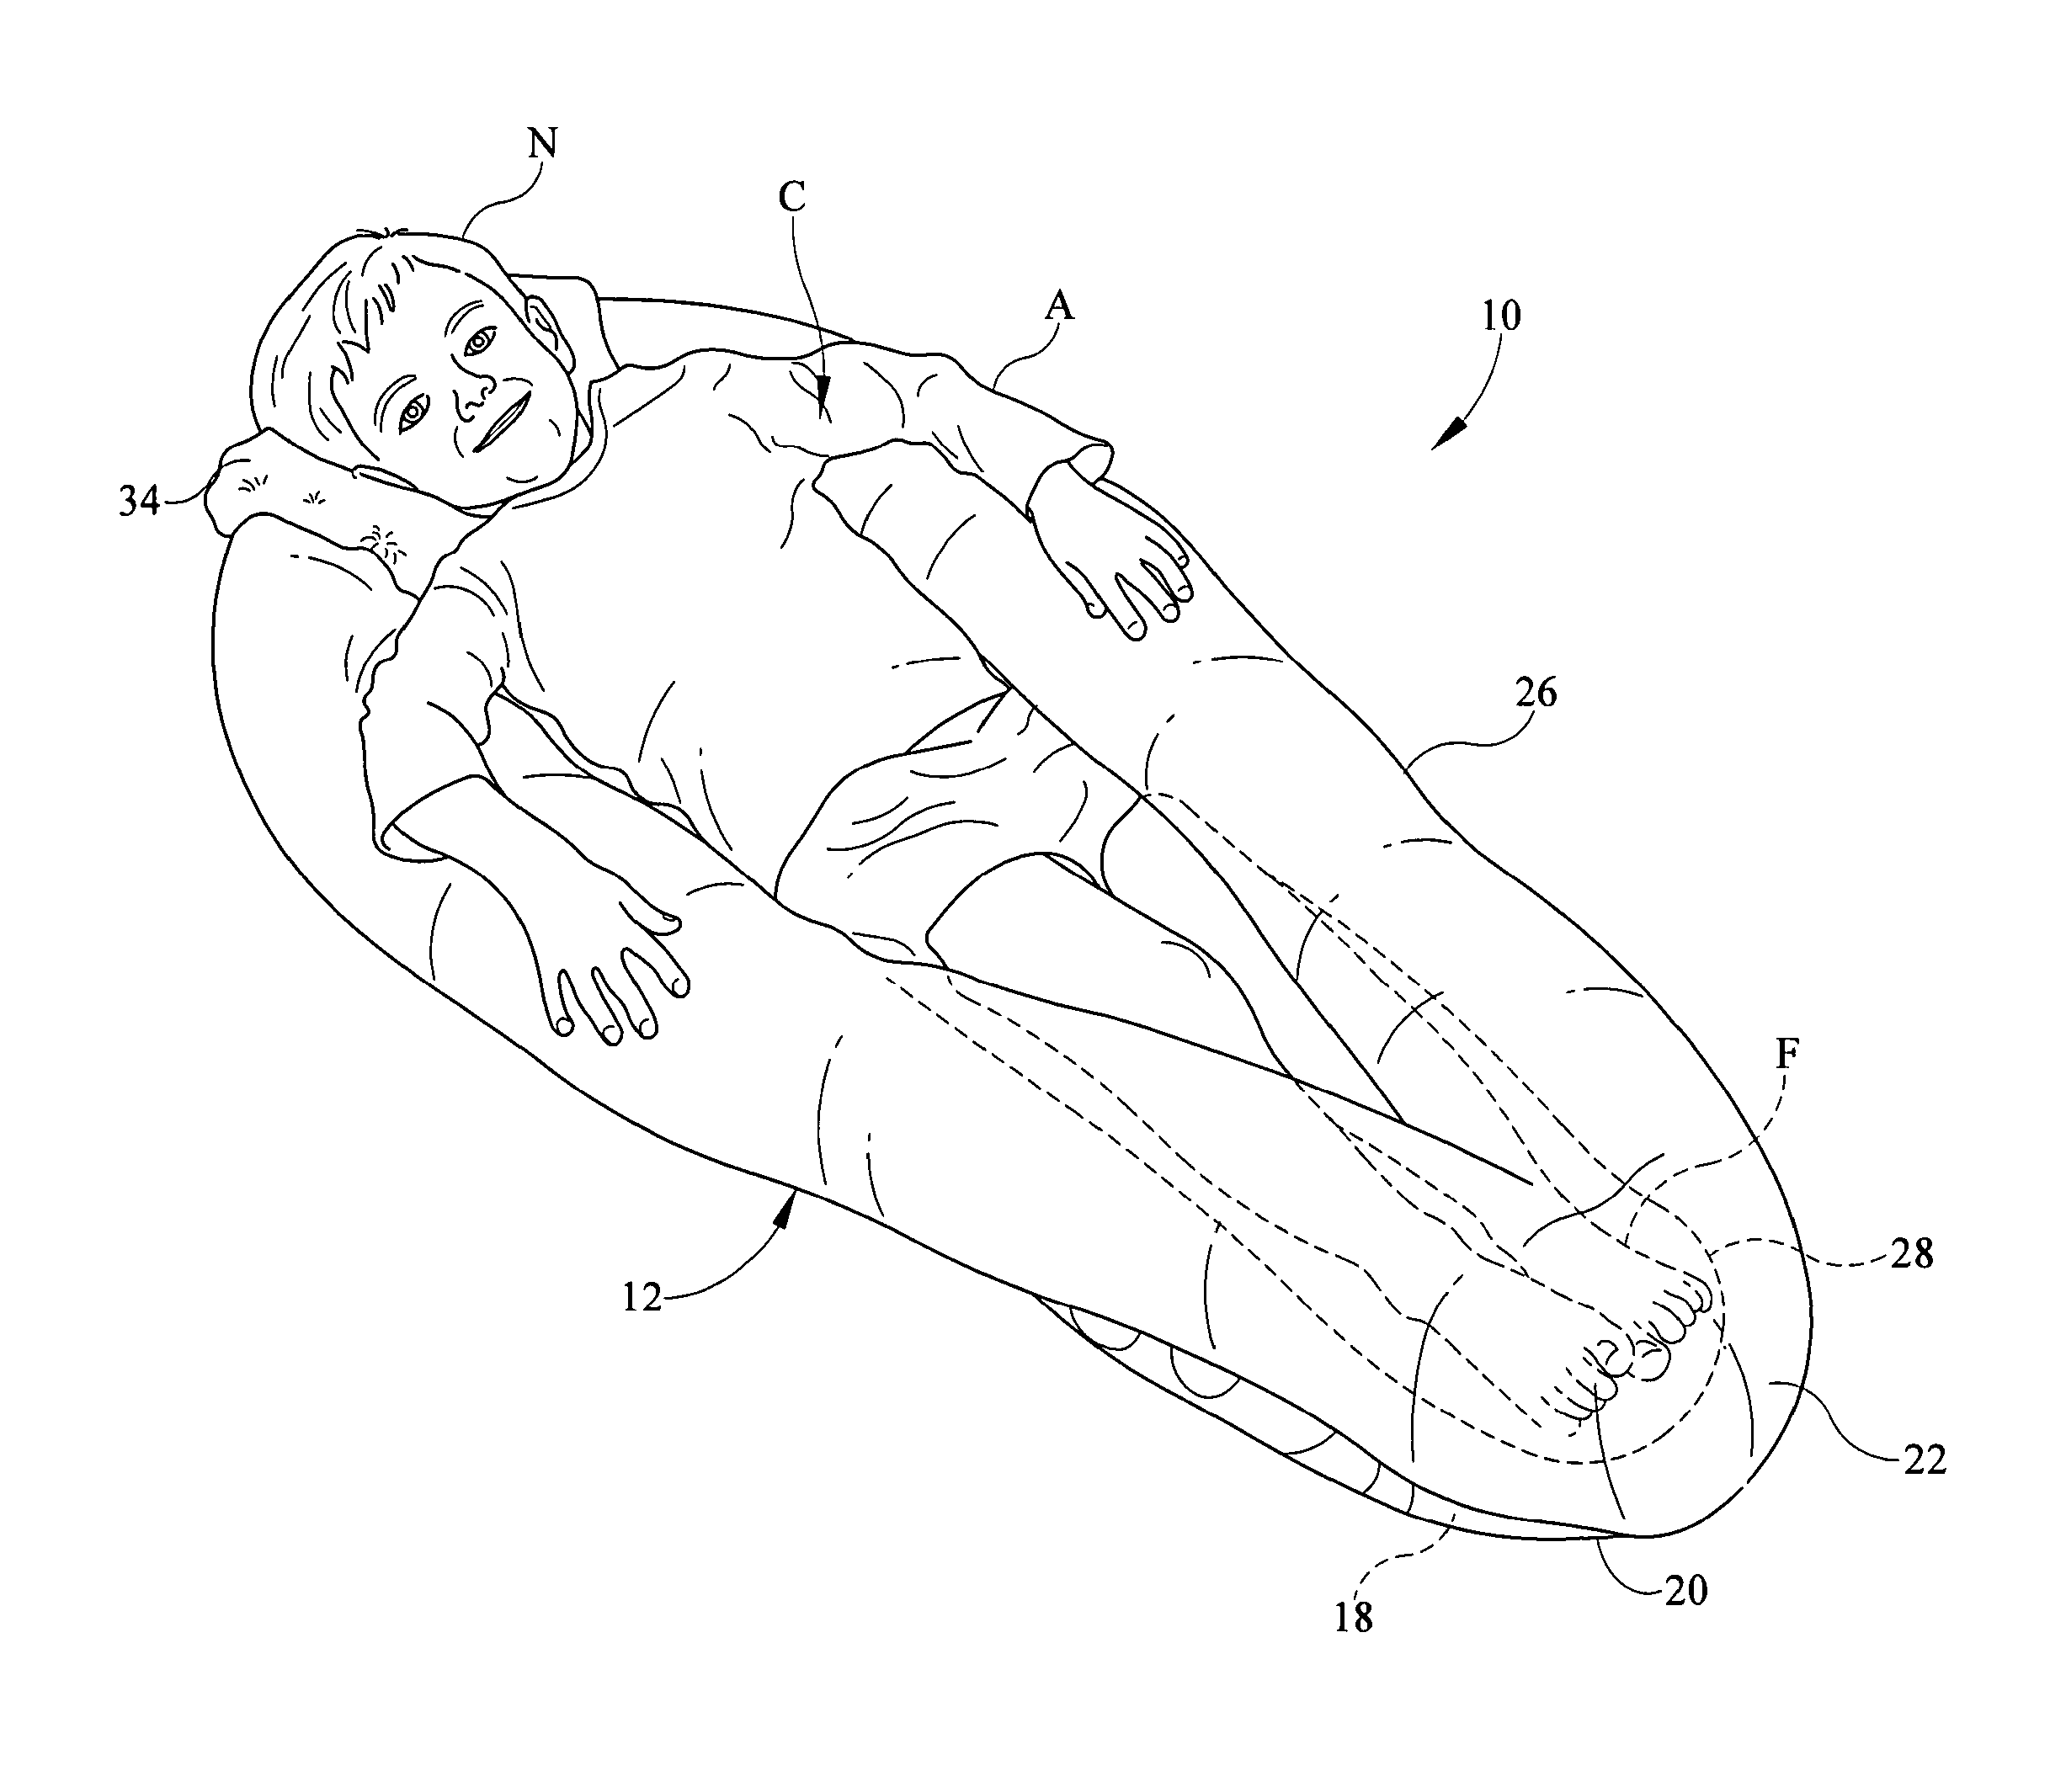 Support for a reclining person